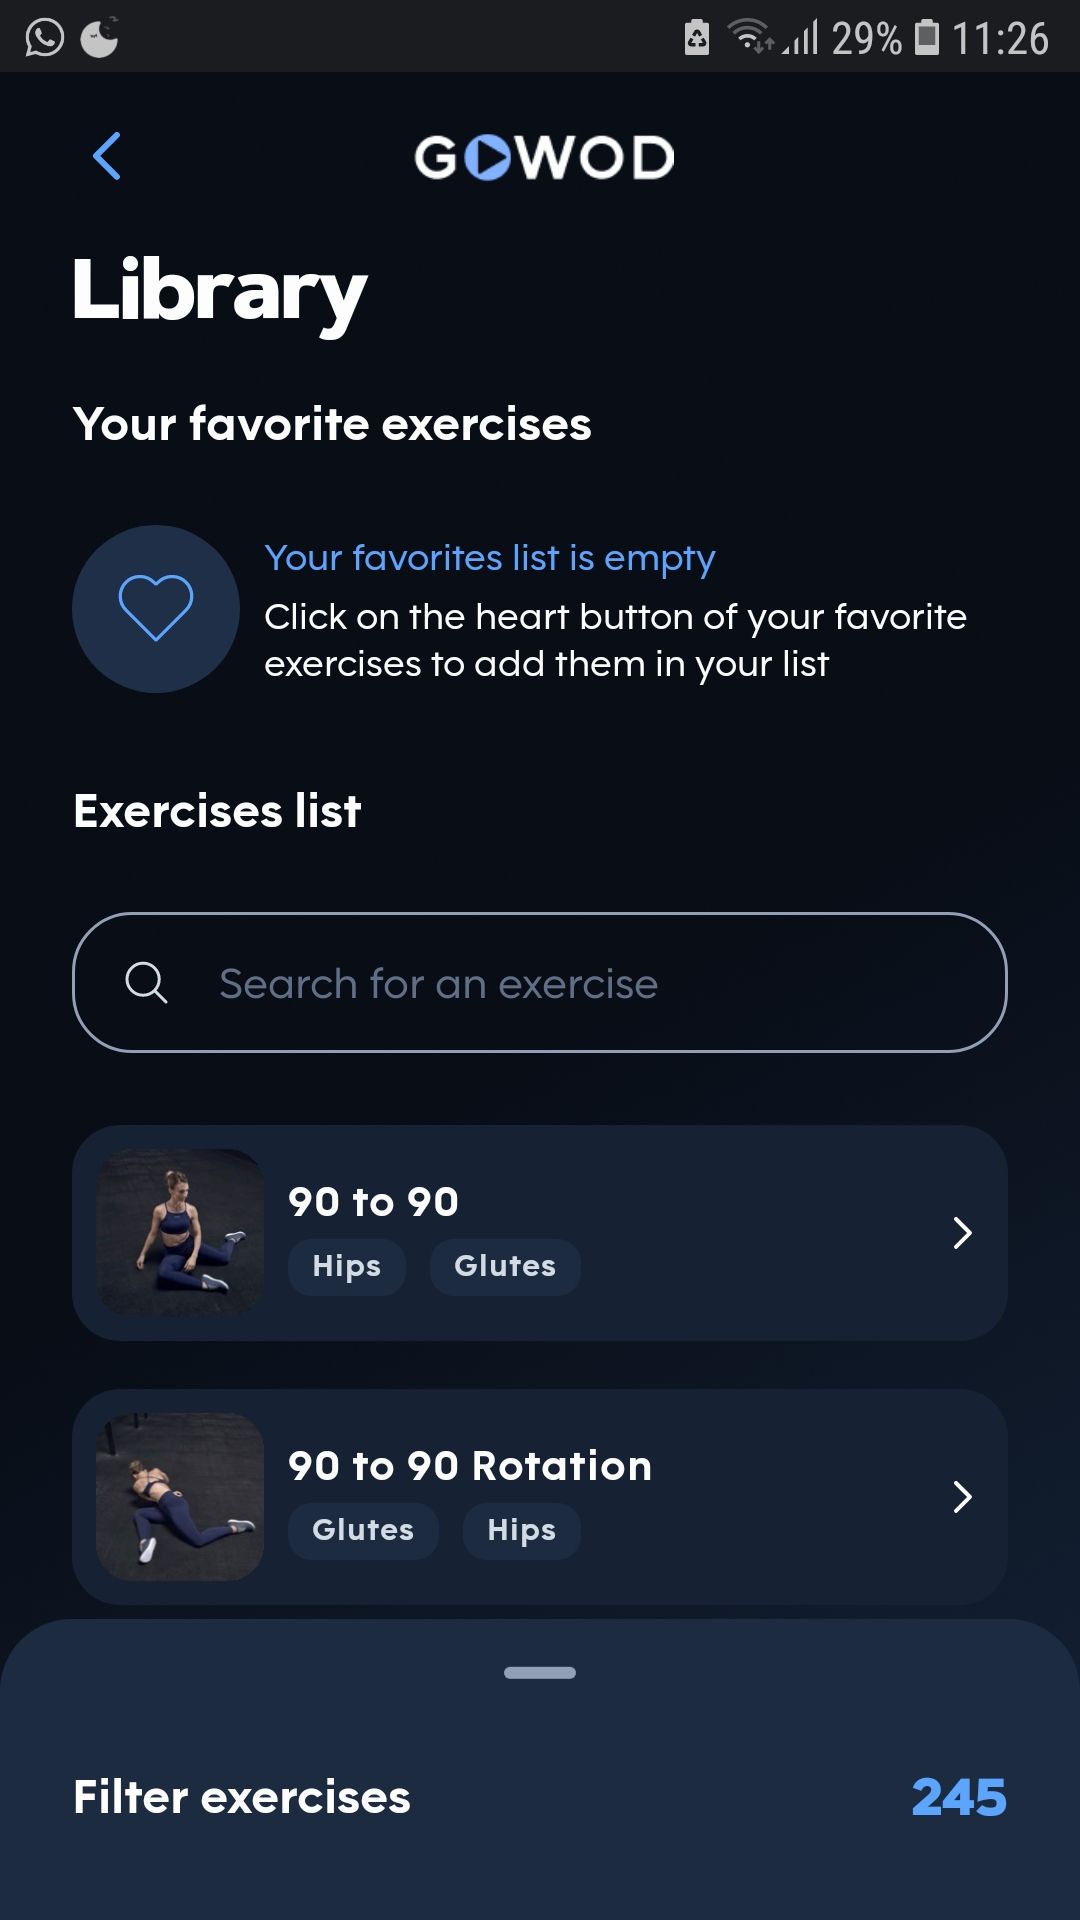 GOWOD mobile exercise app library